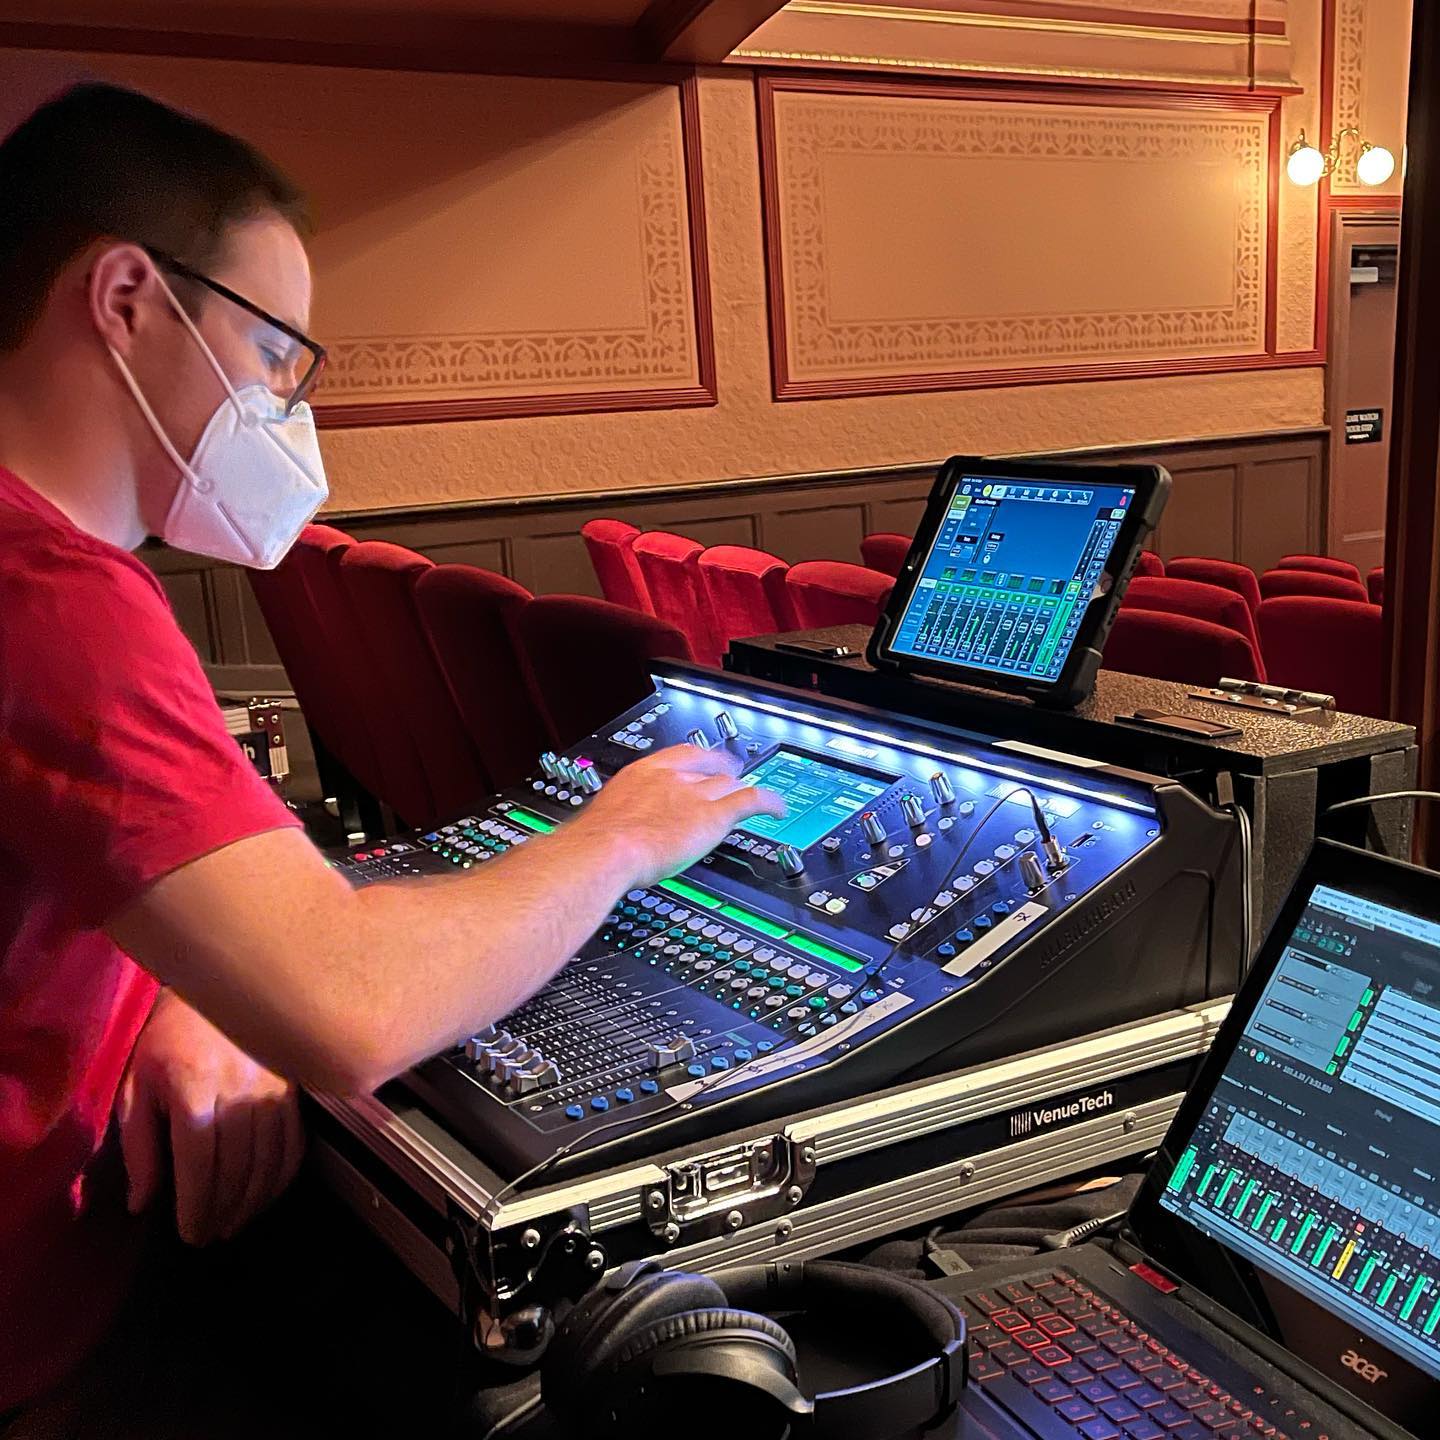 When there’s no concert work, mixing multitrack recordings are the next best thing to keep the ears, mind and muscle memory sharp - and explore the full functionality of our equipment. 

Hard to believe we purchased this almost a year ago, and it’s only been out in the wild 3 times.